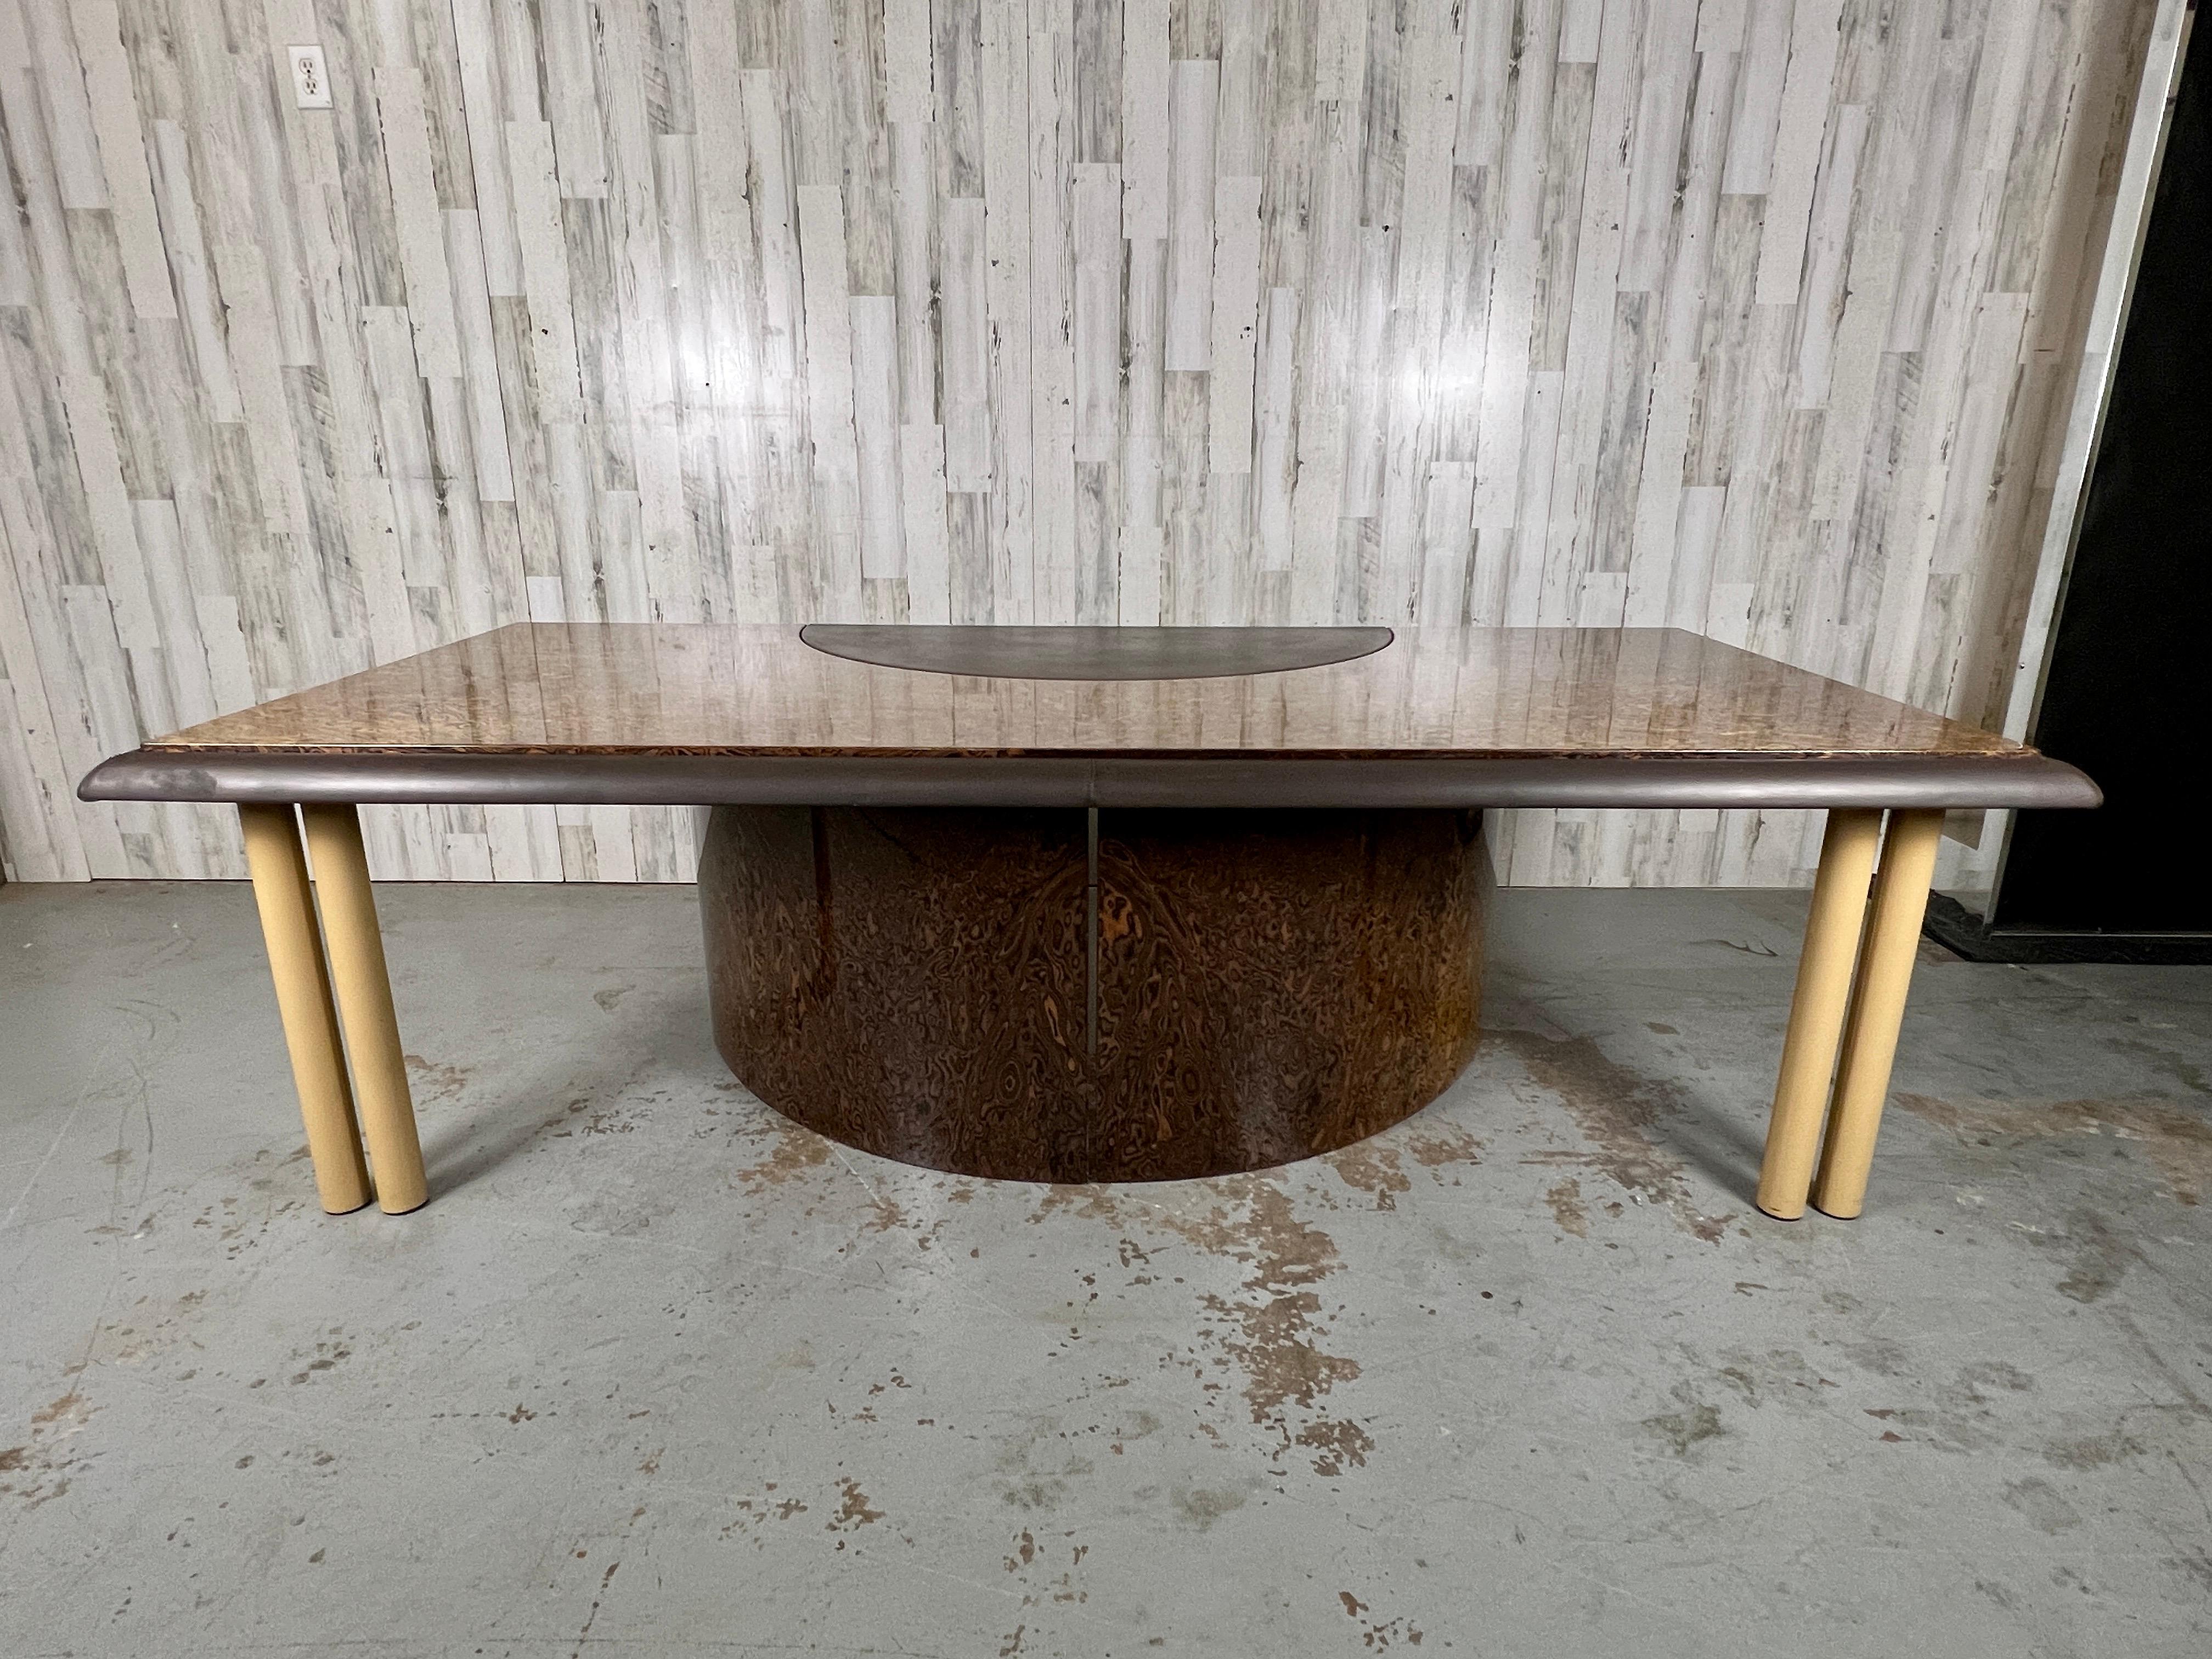 Saporiti Italia Exotic Burl wood & leather executive desk. A combination of straight and curved lines with Burl wood base and top accented with brown leather edge and work surface. Contrasting leather color on the legs make this a stunning